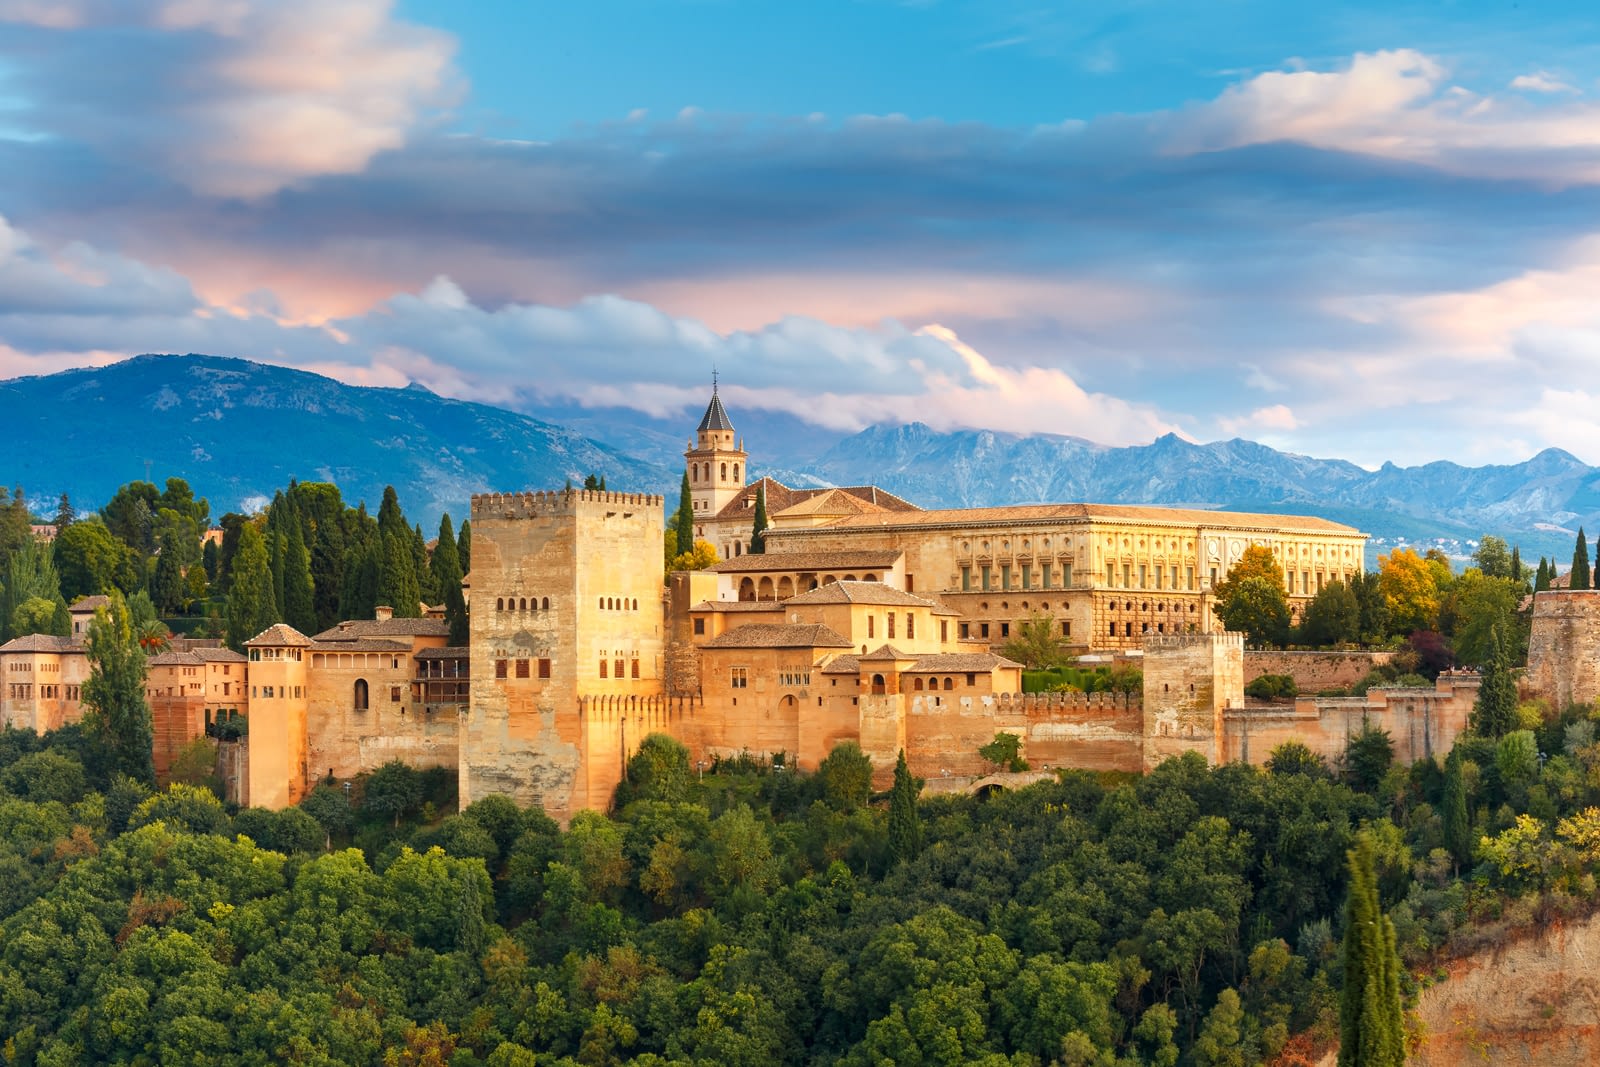 Alhambra - The One Attraction You Must Visit in Granada